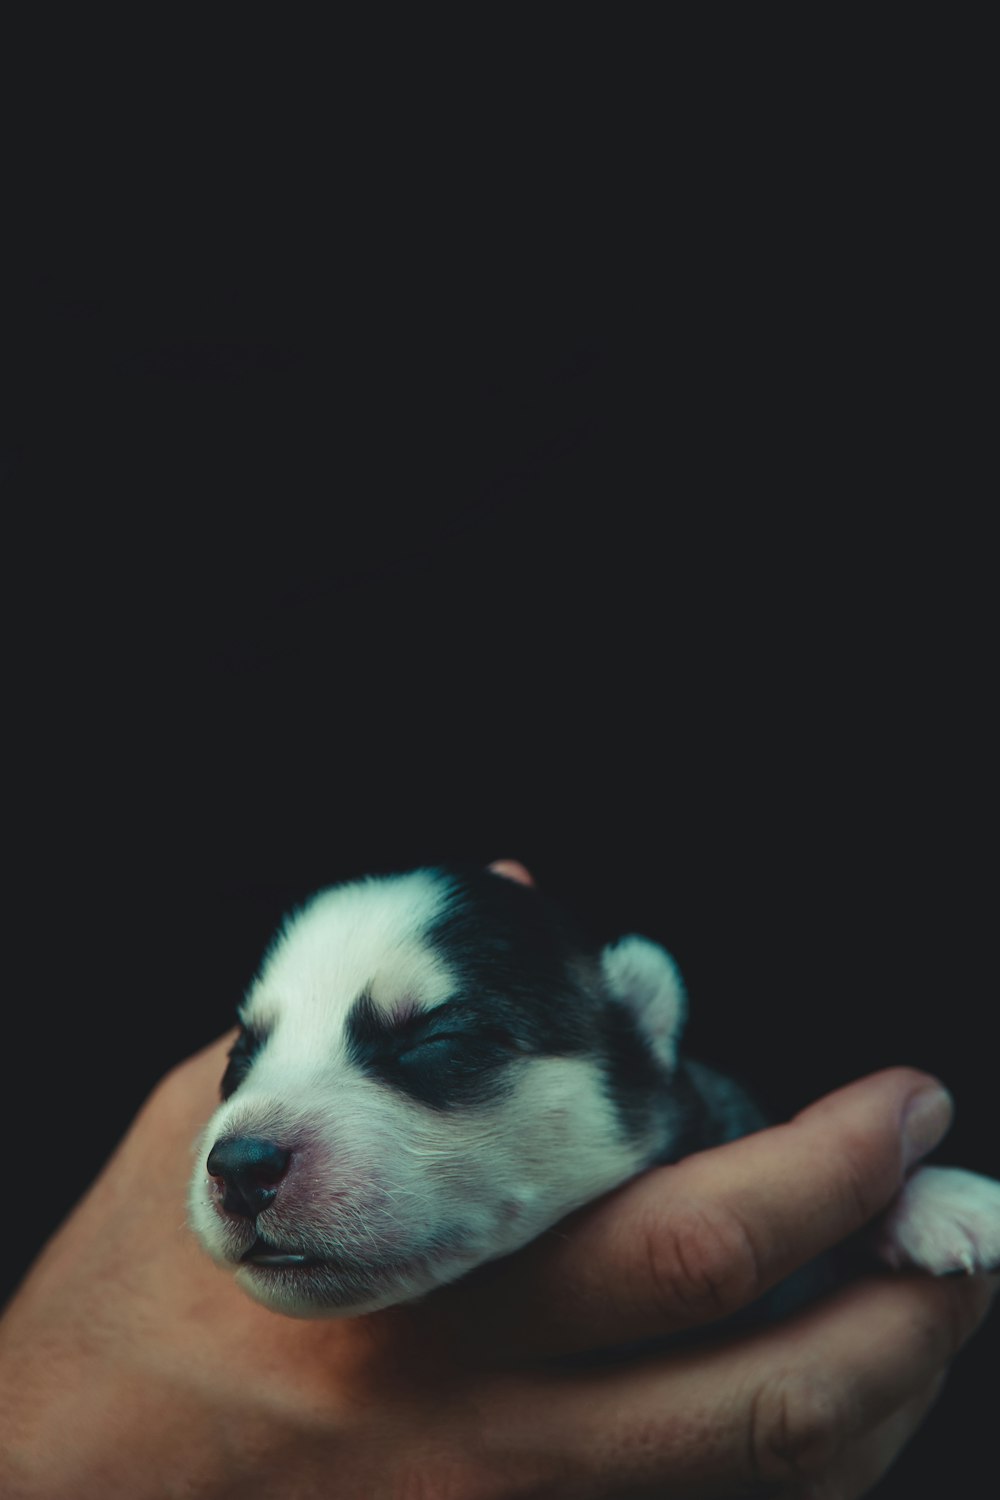 person holding sleeping puppy